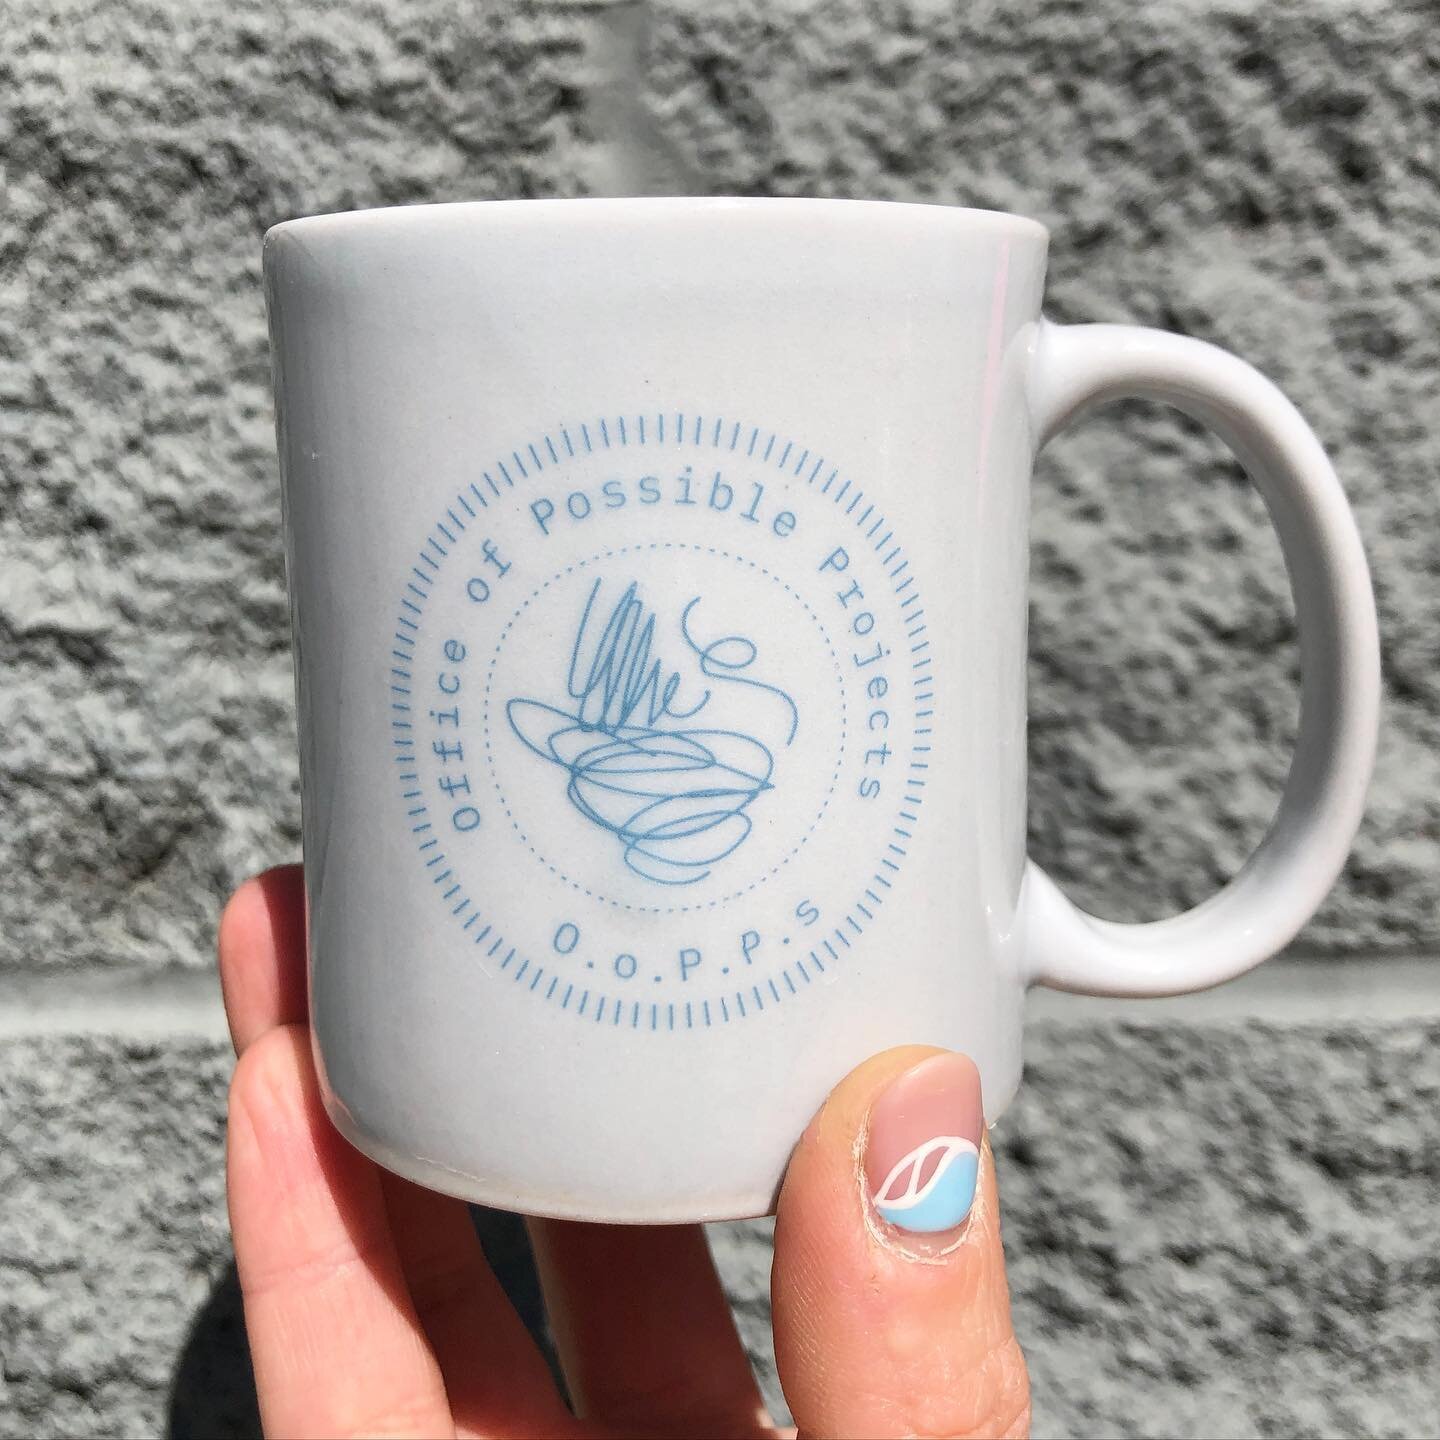 They&rsquo;re finally here! I made another big batch of these slip cast #officeofpossibleprojects mugs!!! Because they are cast from actual #officemugs, they safely hold ~7 ounces - perfect for a cappuccino or a small cuppa coffee. I&rsquo;m selling 